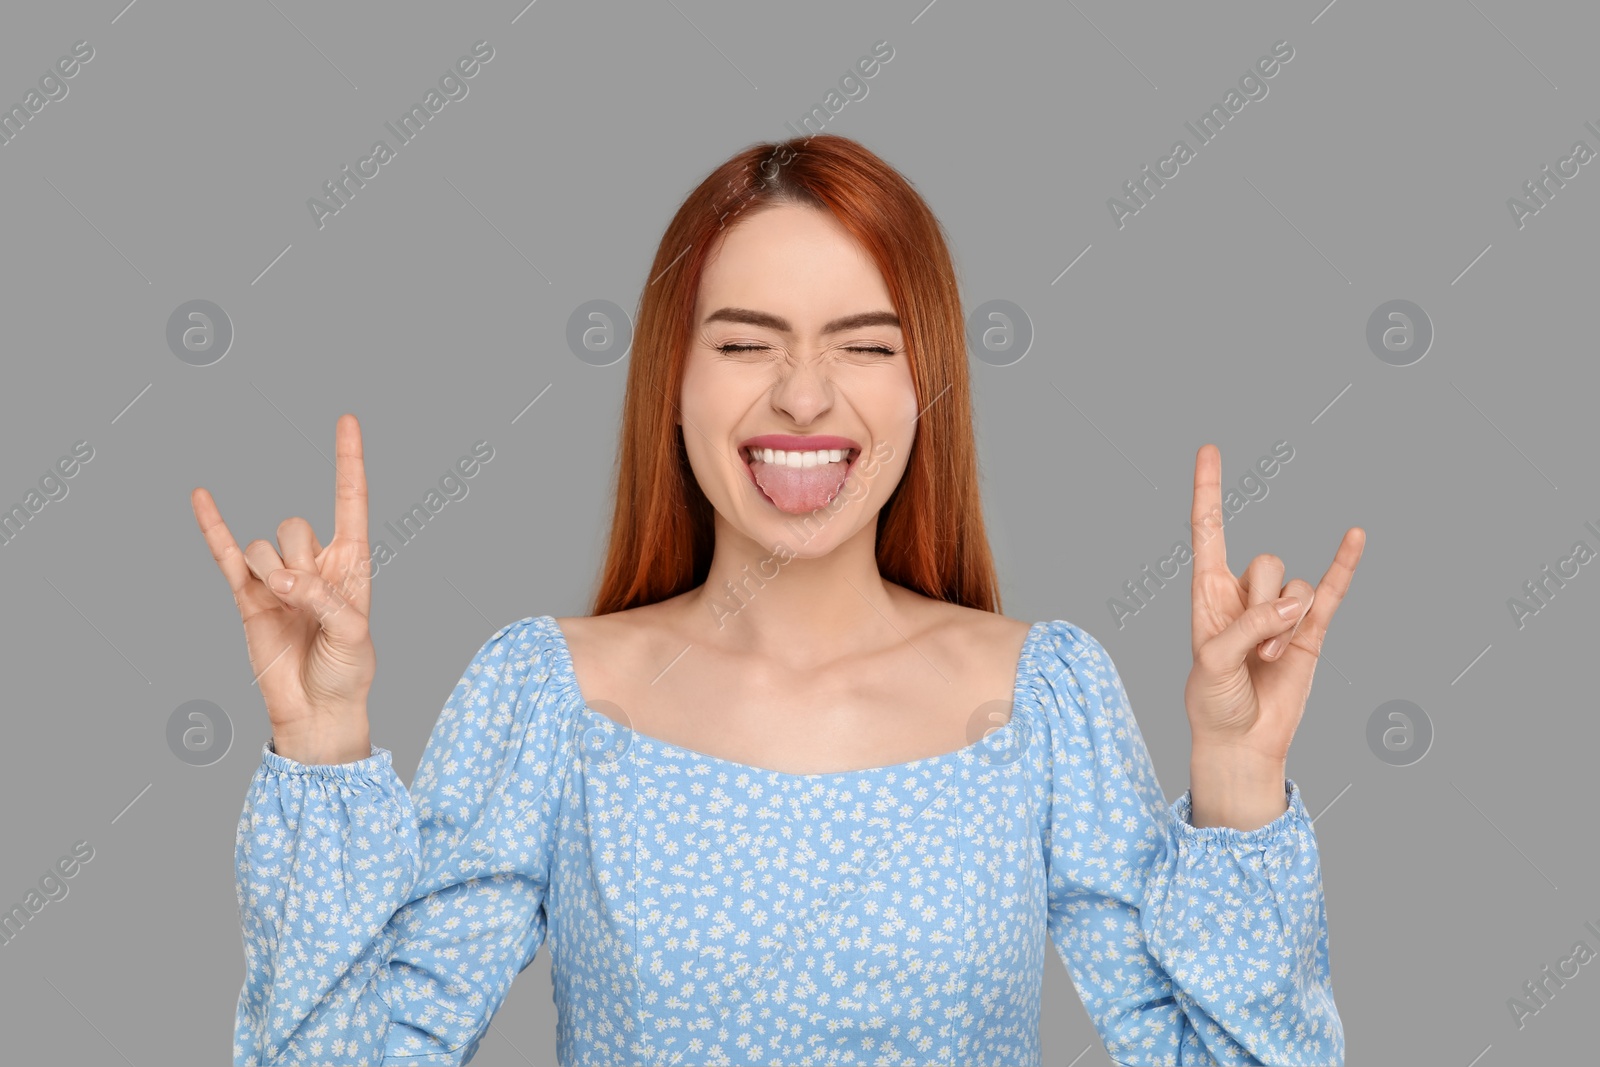 Photo of Happy woman showing her tongue and rock gesture on gray background